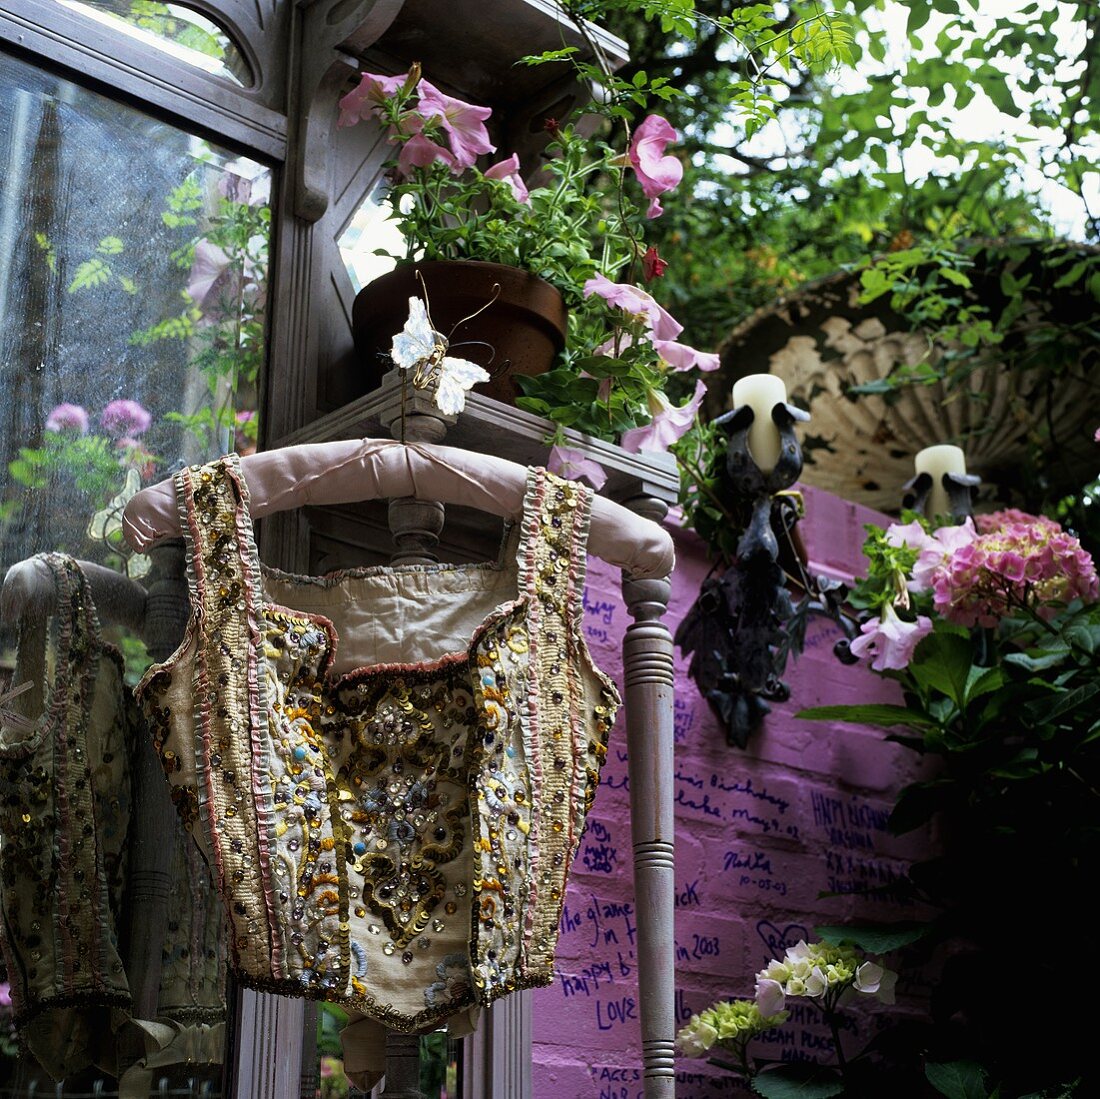 Paillette vest on a coat hanger in front of a pink wall with plant pots